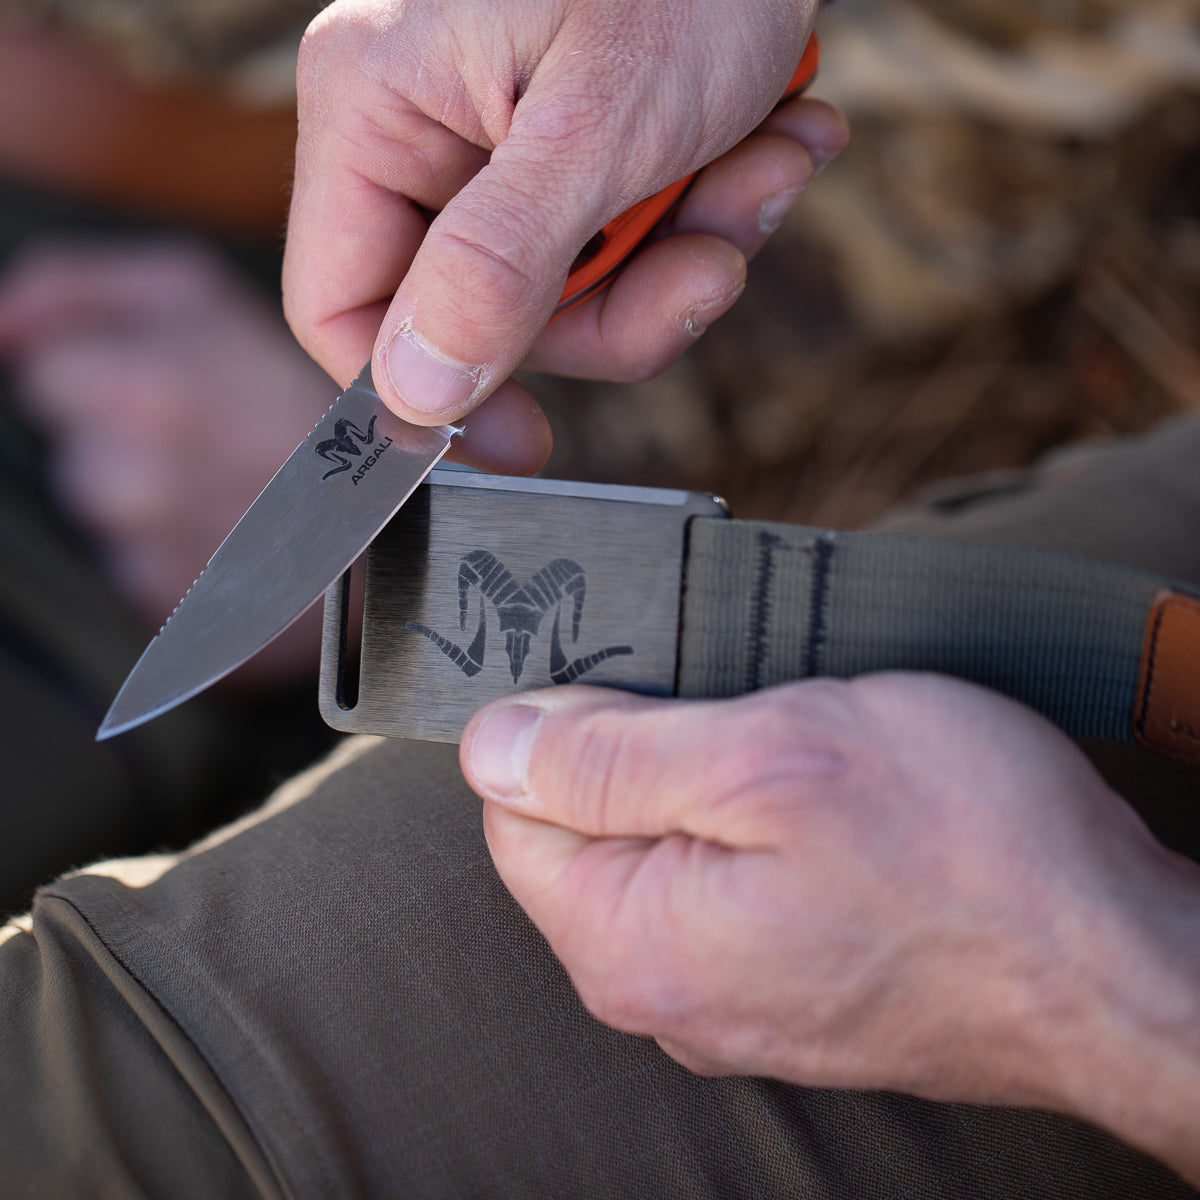 How to Sharpen a Hunting Knife with Born and Raised Outdoors - Work Sharp  Sharpeners